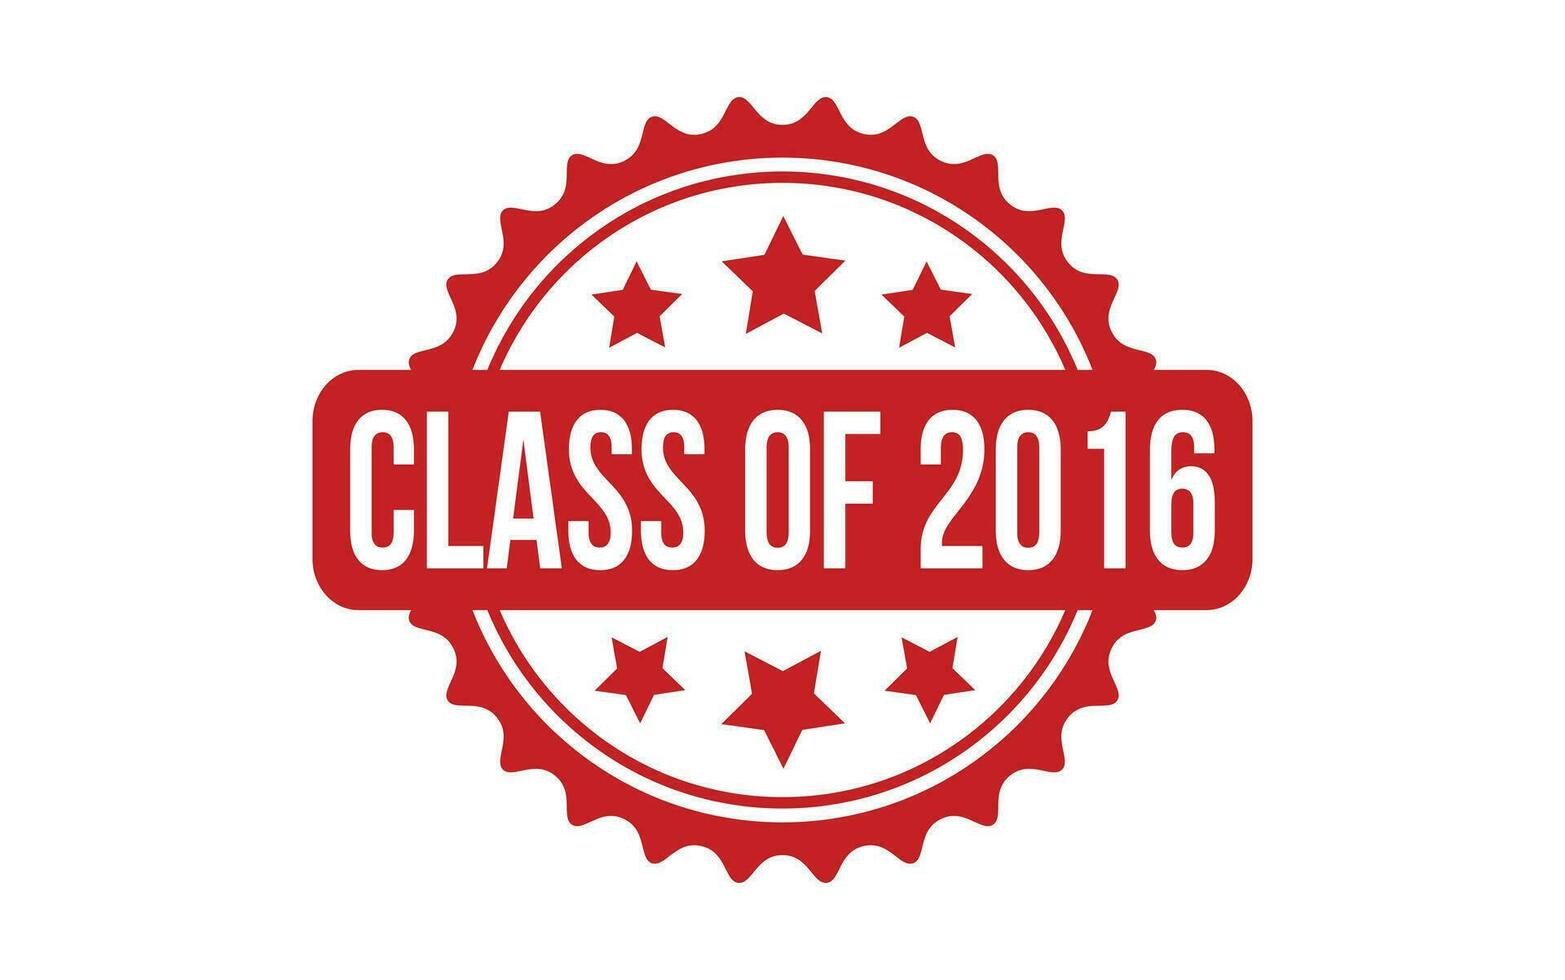 Class of 2016 rubber grunge stamp seal vector